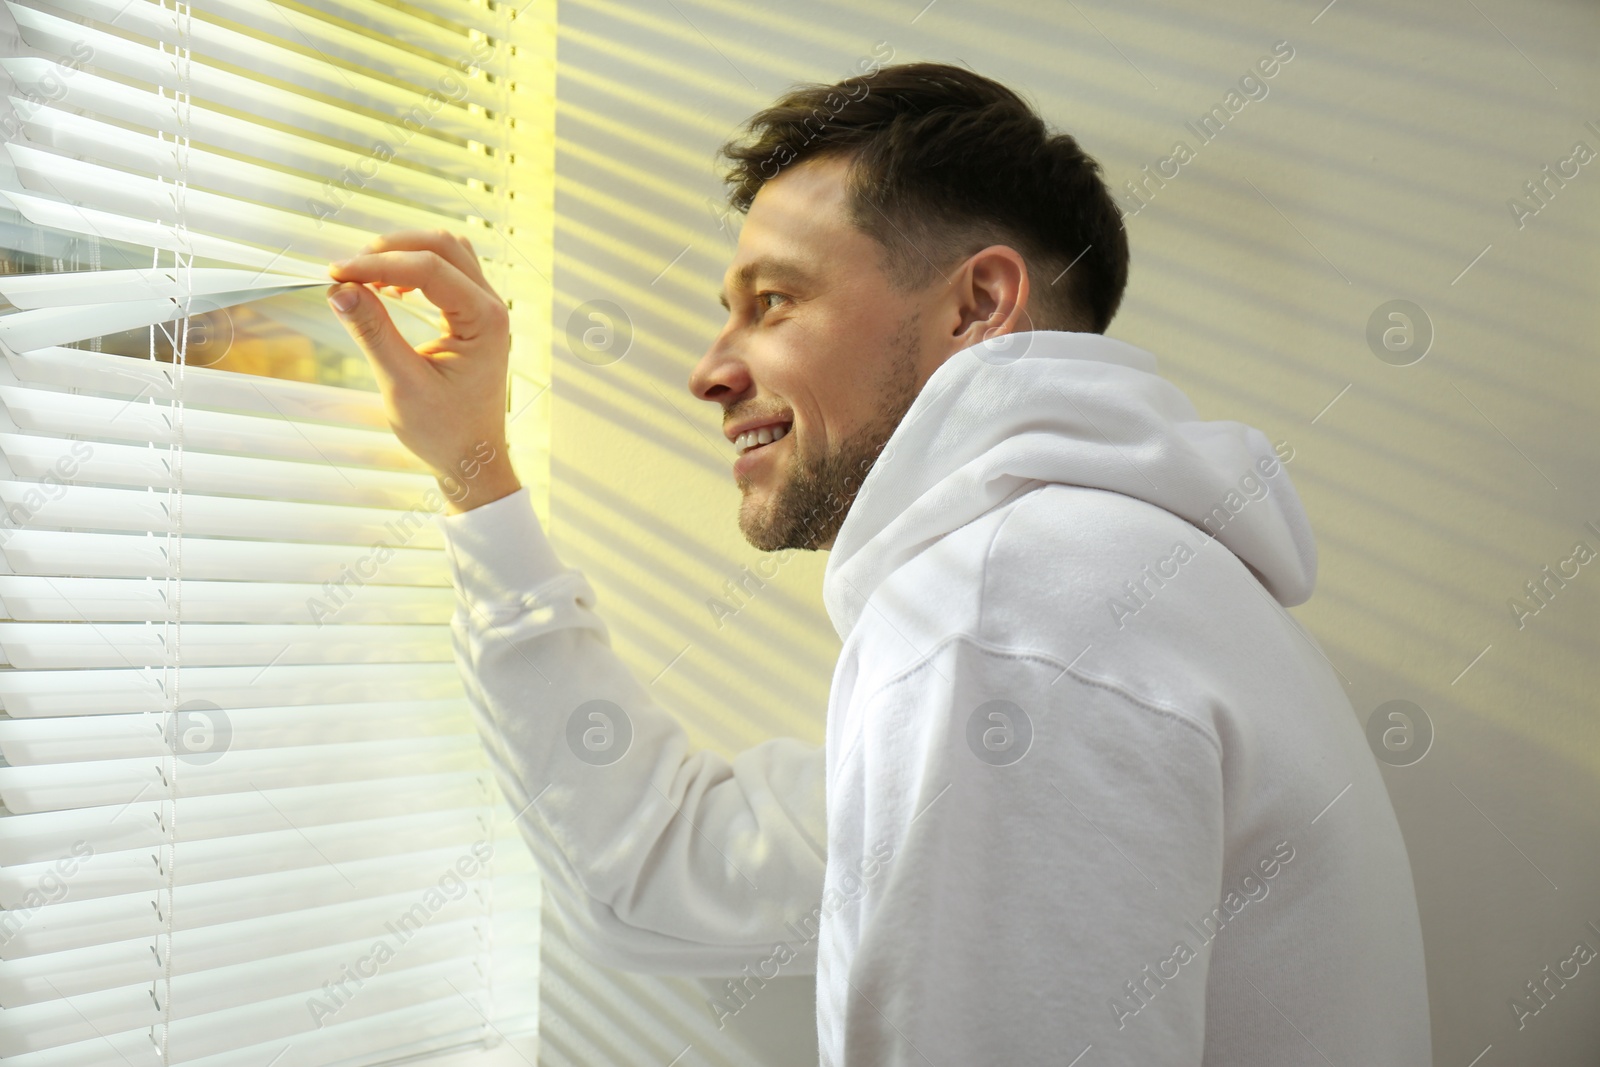 Photo of Handsome man opening window blinds at home